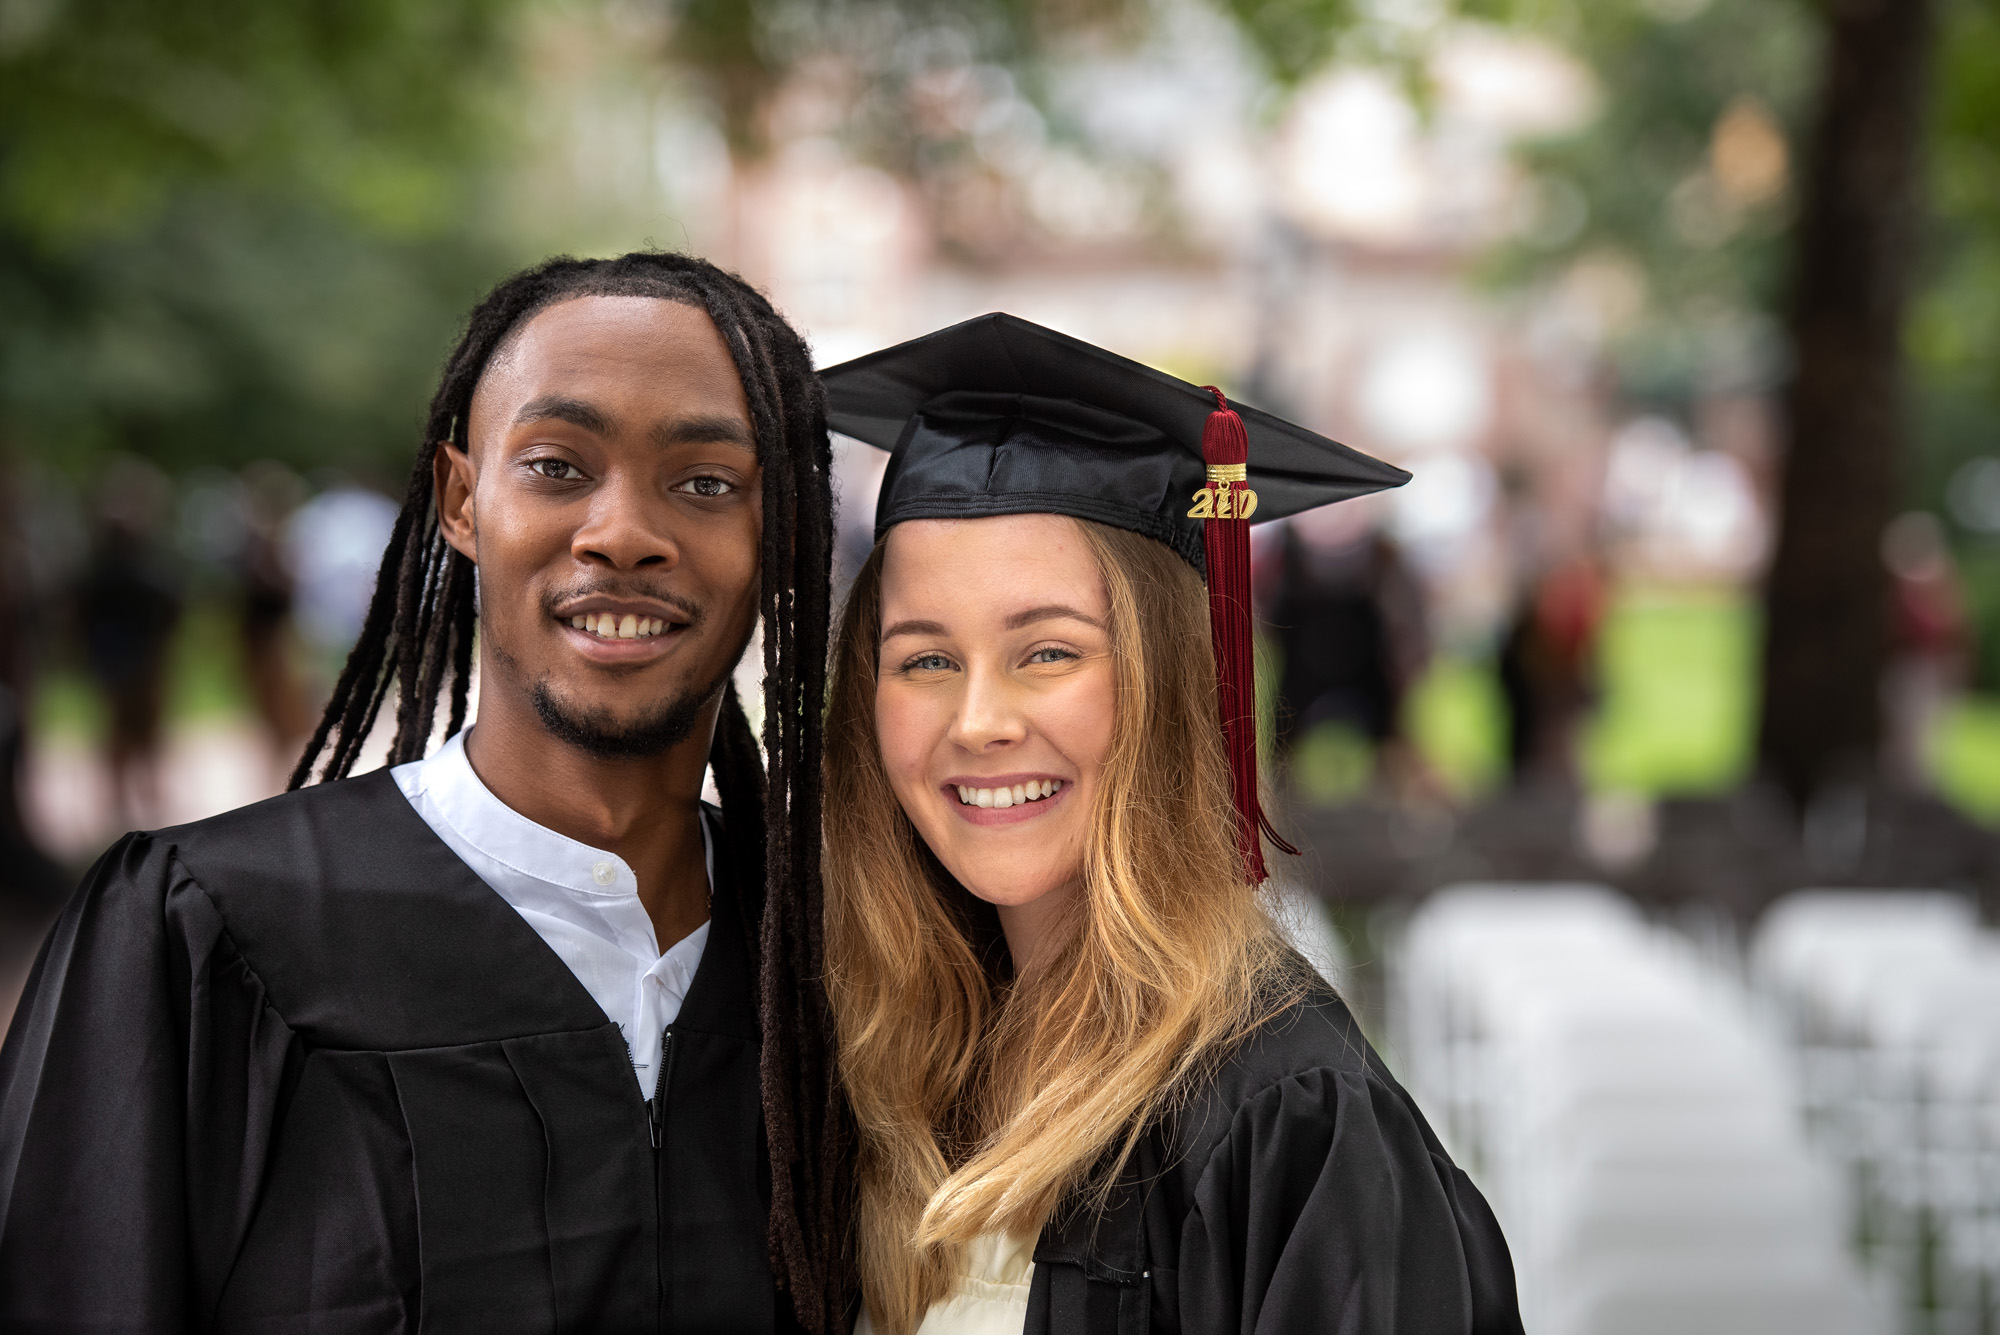 Two students pose for a photo after the graduation ceremony